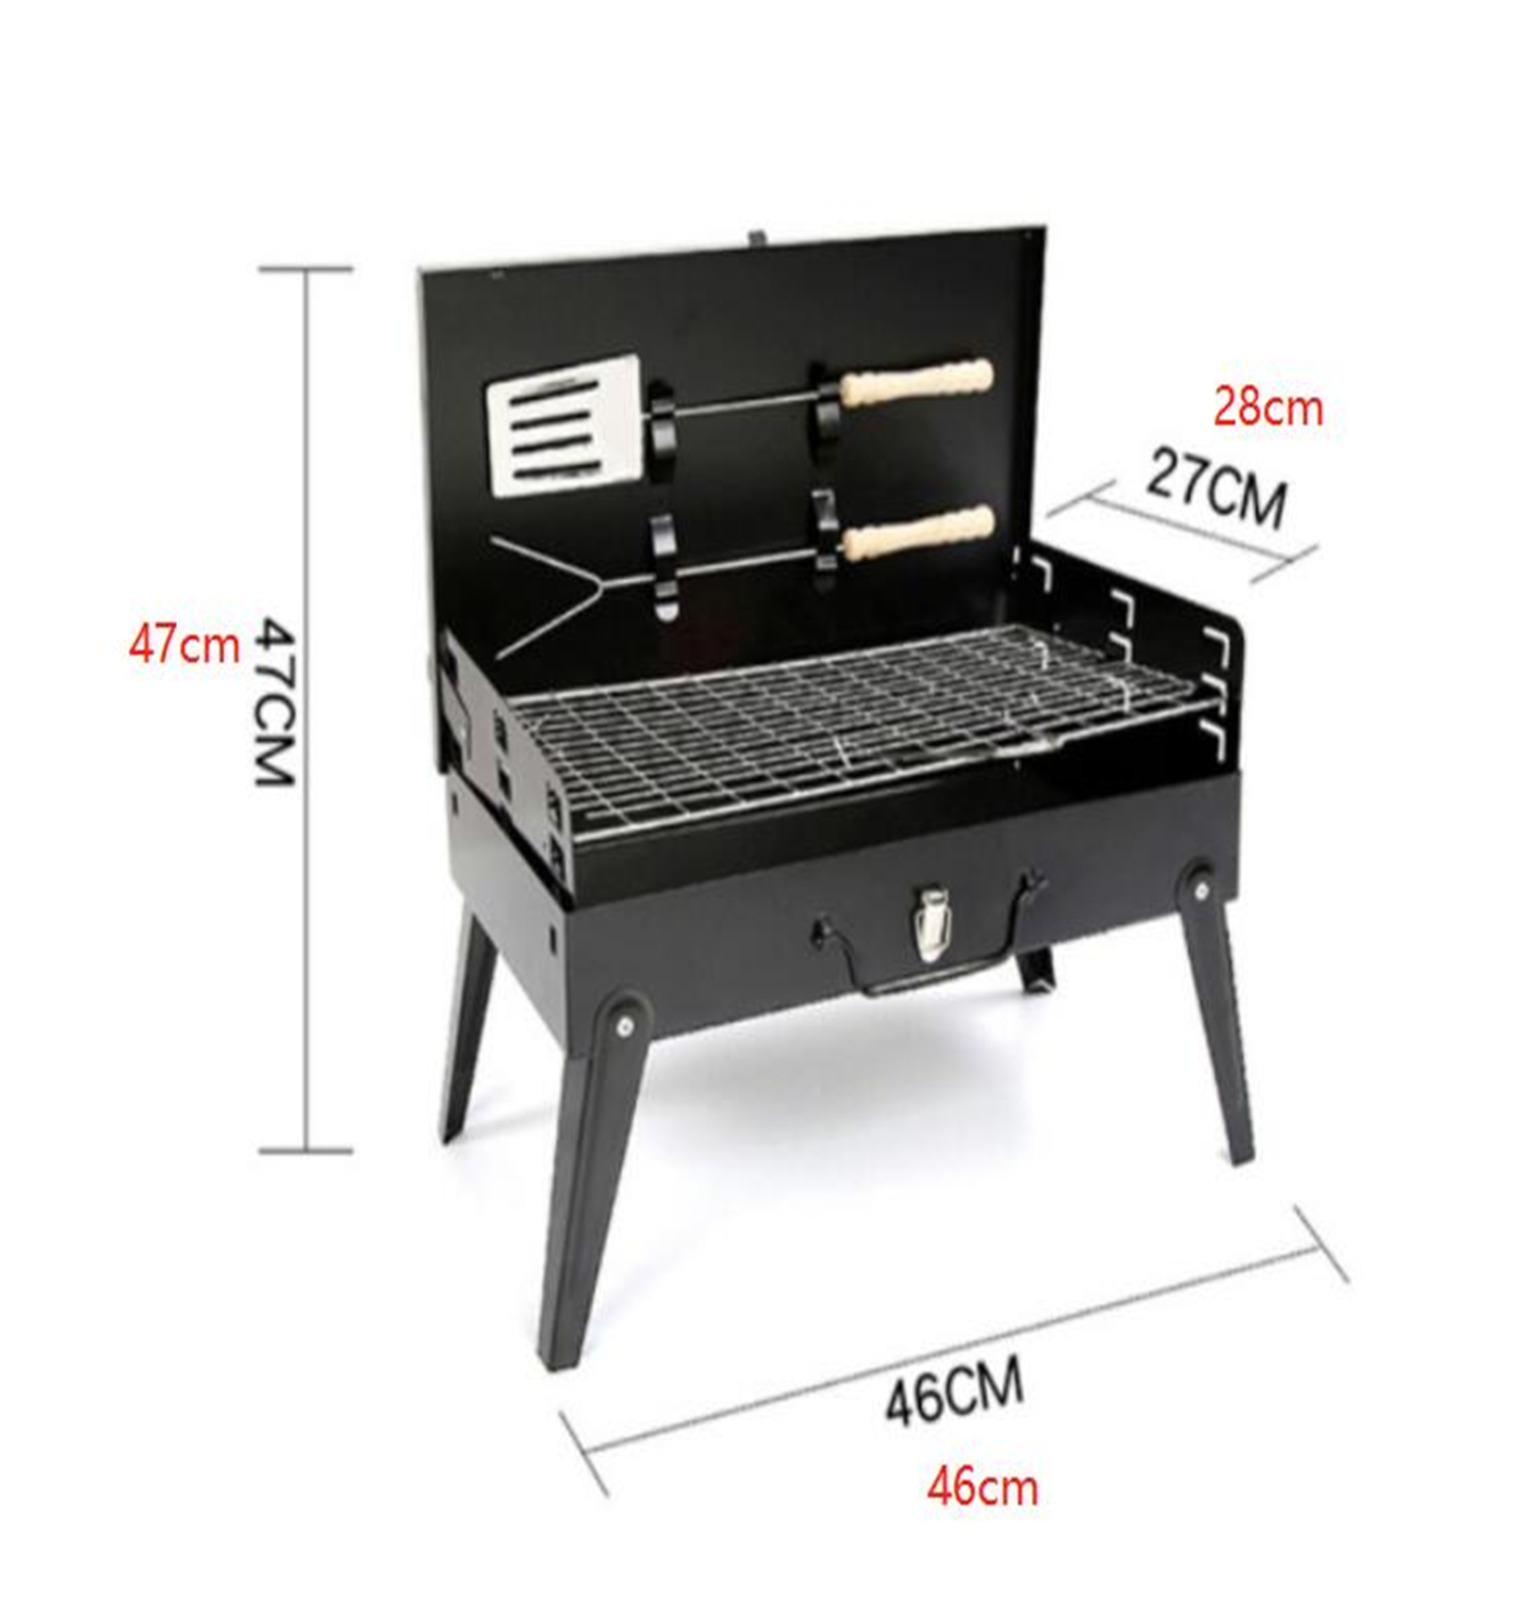 Black Portable Folding Charcoal BBQ Barbecue Camping Grill Travel Picnic Outdoor